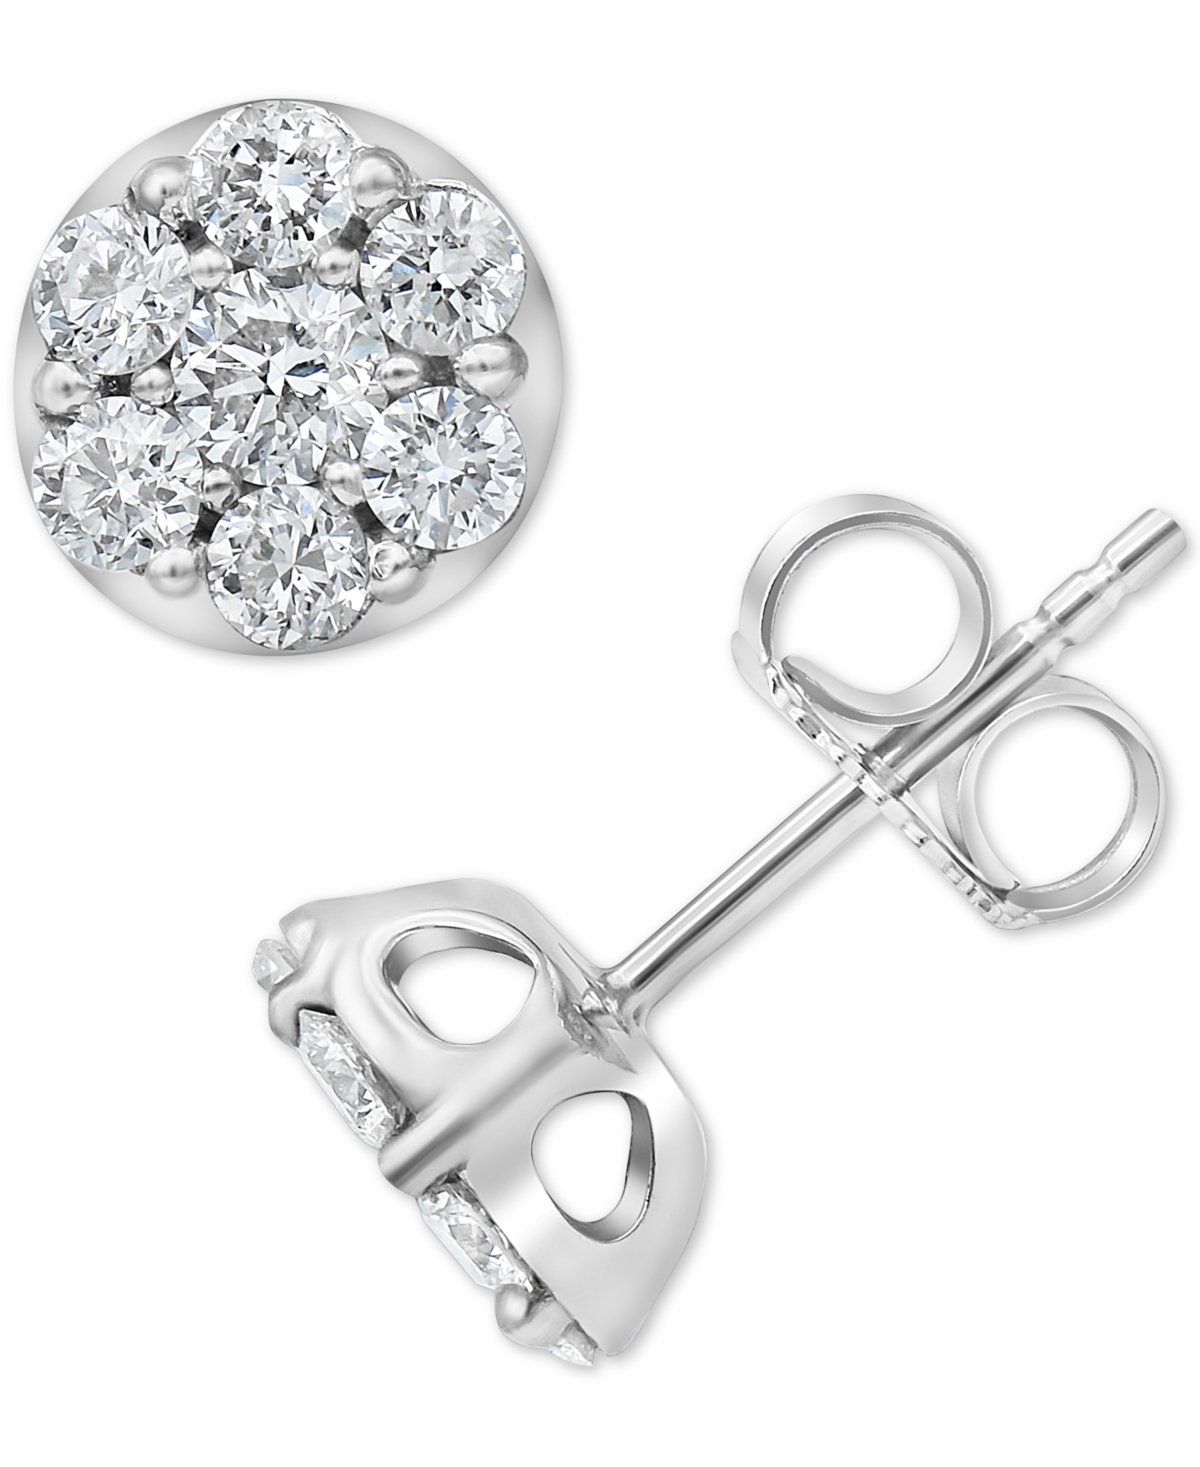 Lab-Created Diamond Cluster Stud Earrings (1 ct. t.w.) in Sterling Silver - White Gold